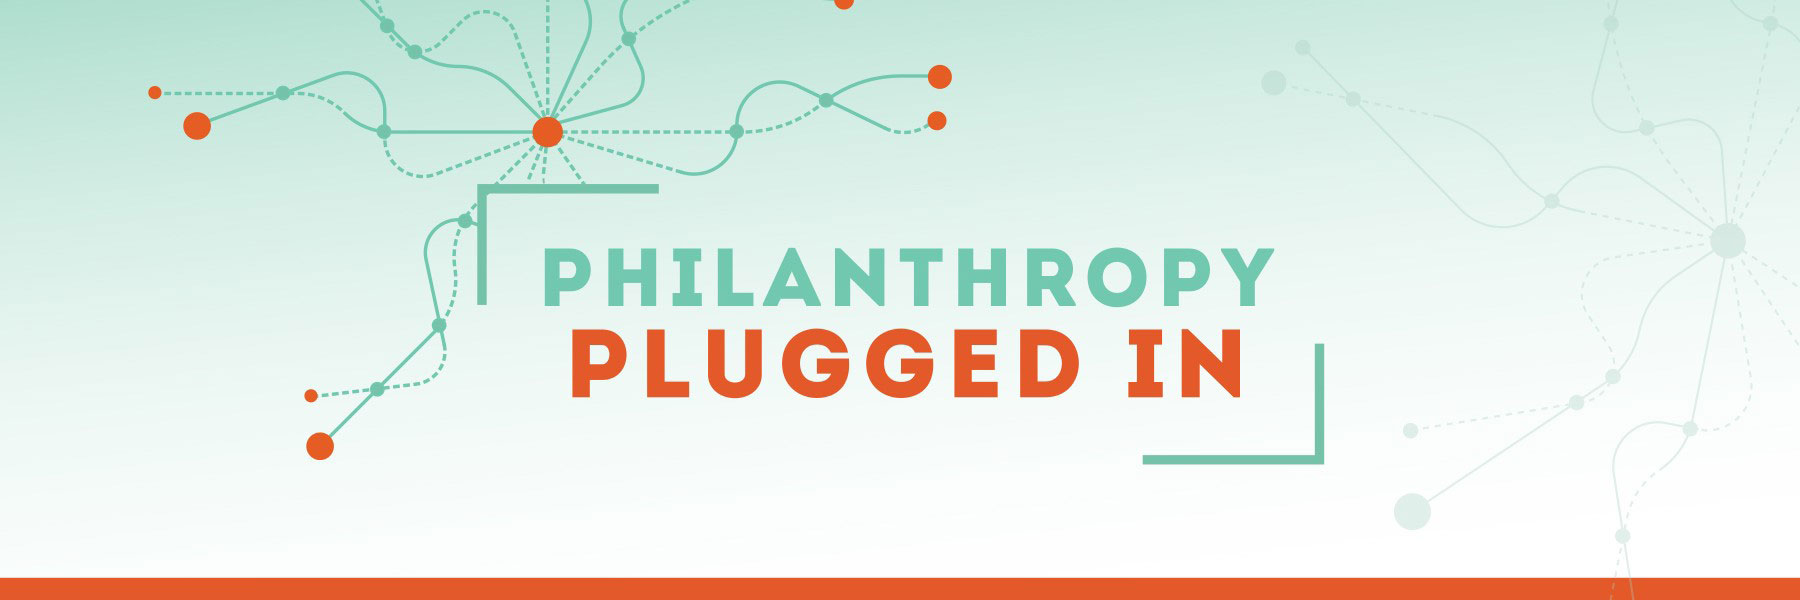 Philanthropy Plugged In 